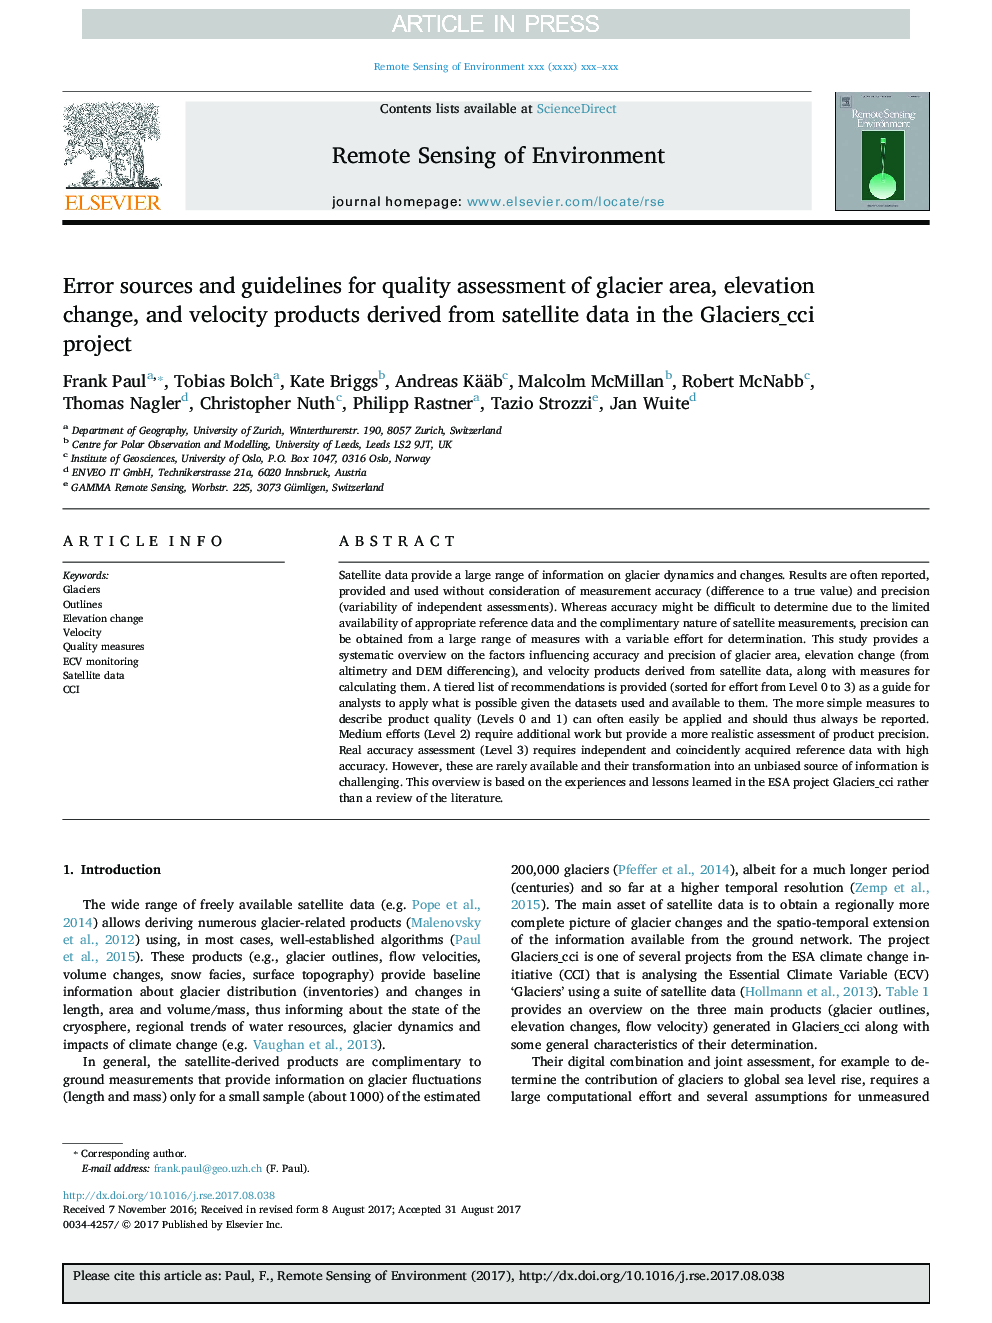 Error sources and guidelines for quality assessment of glacier area, elevation change, and velocity products derived from satellite data in the Glaciers_cci project